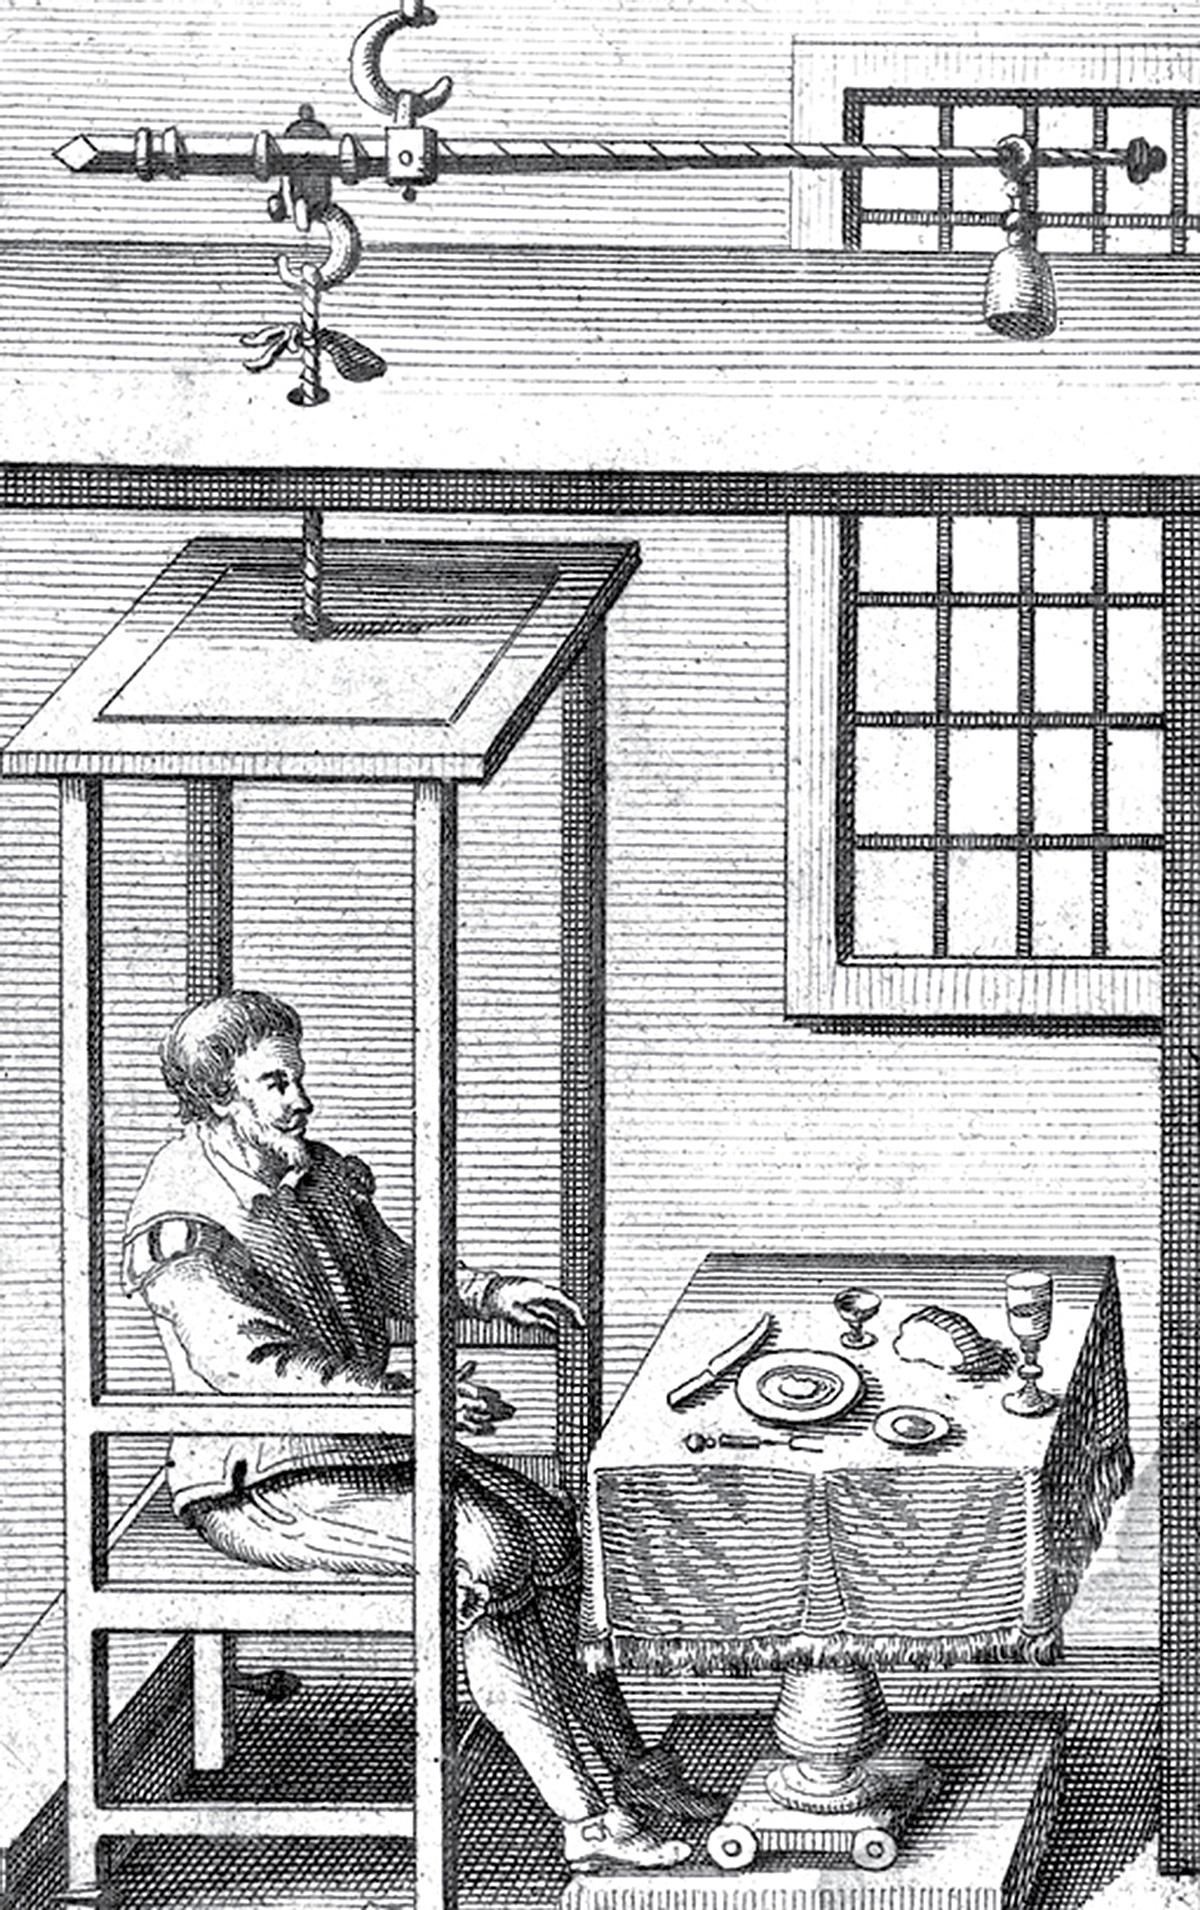 An illustration of Santorio Sanctorius in his “statical chair.”